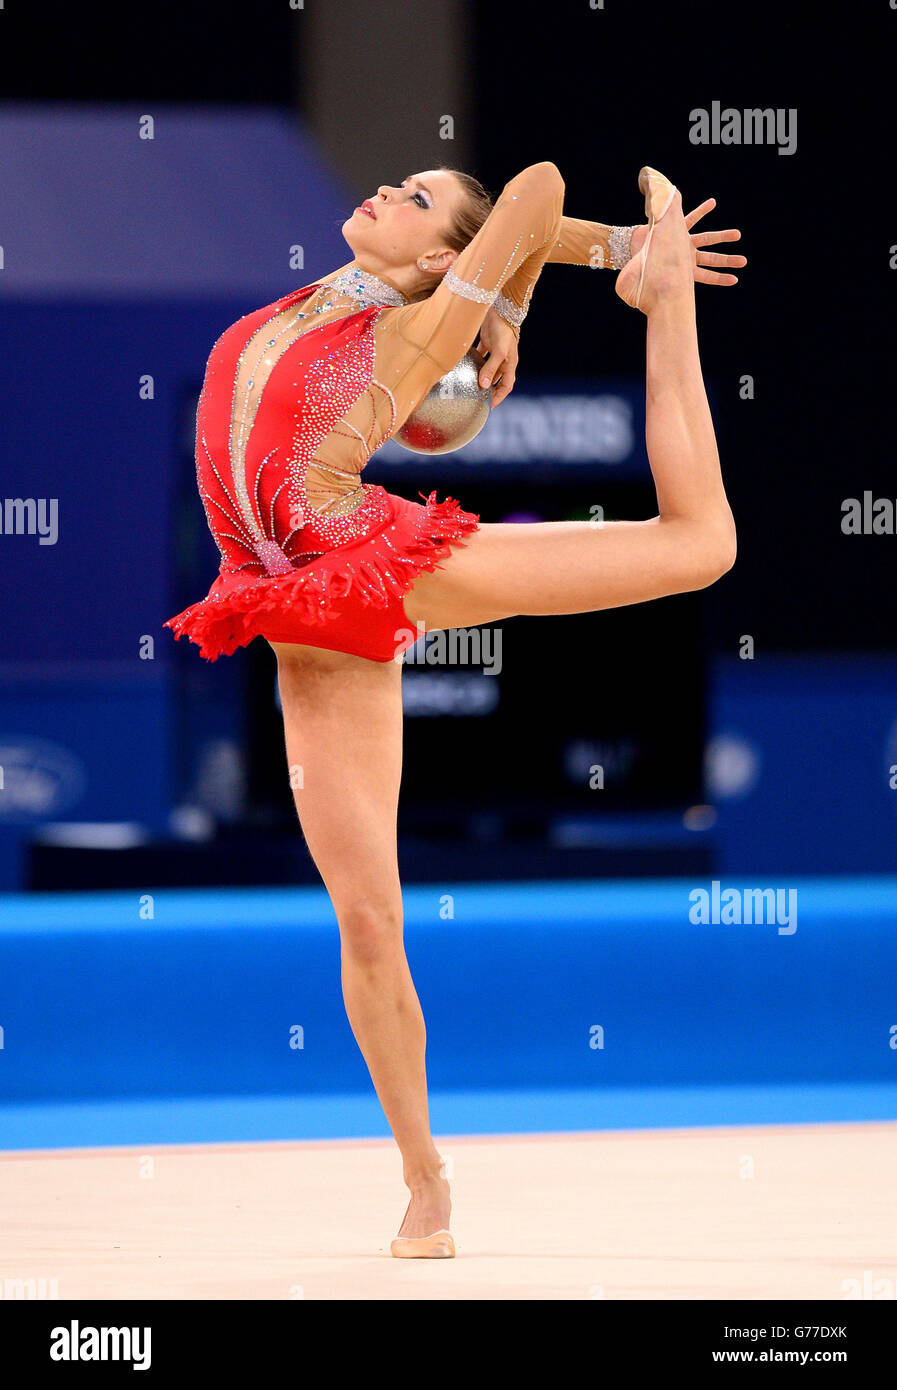 Wales' Francesca Jones during the Rhythmic Gymnastics Team Final and Individual Qualification at the SSE Hydro during the 2014 Commonwealth Games in Glasgow. Stock Photo